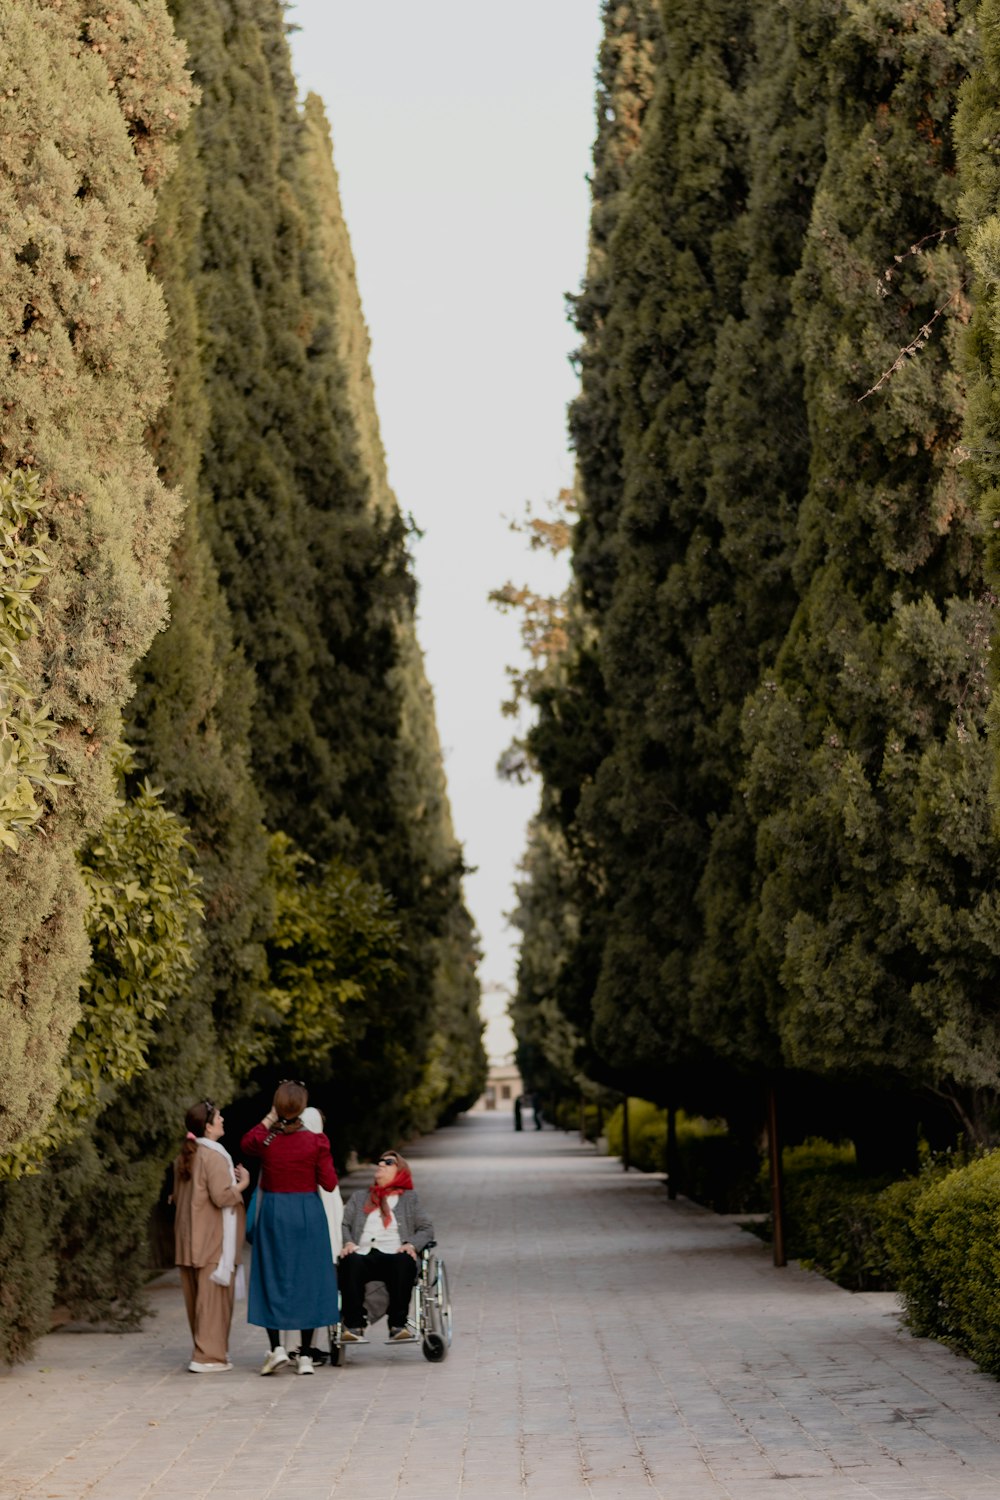 a group of people walking down a road lined with trees